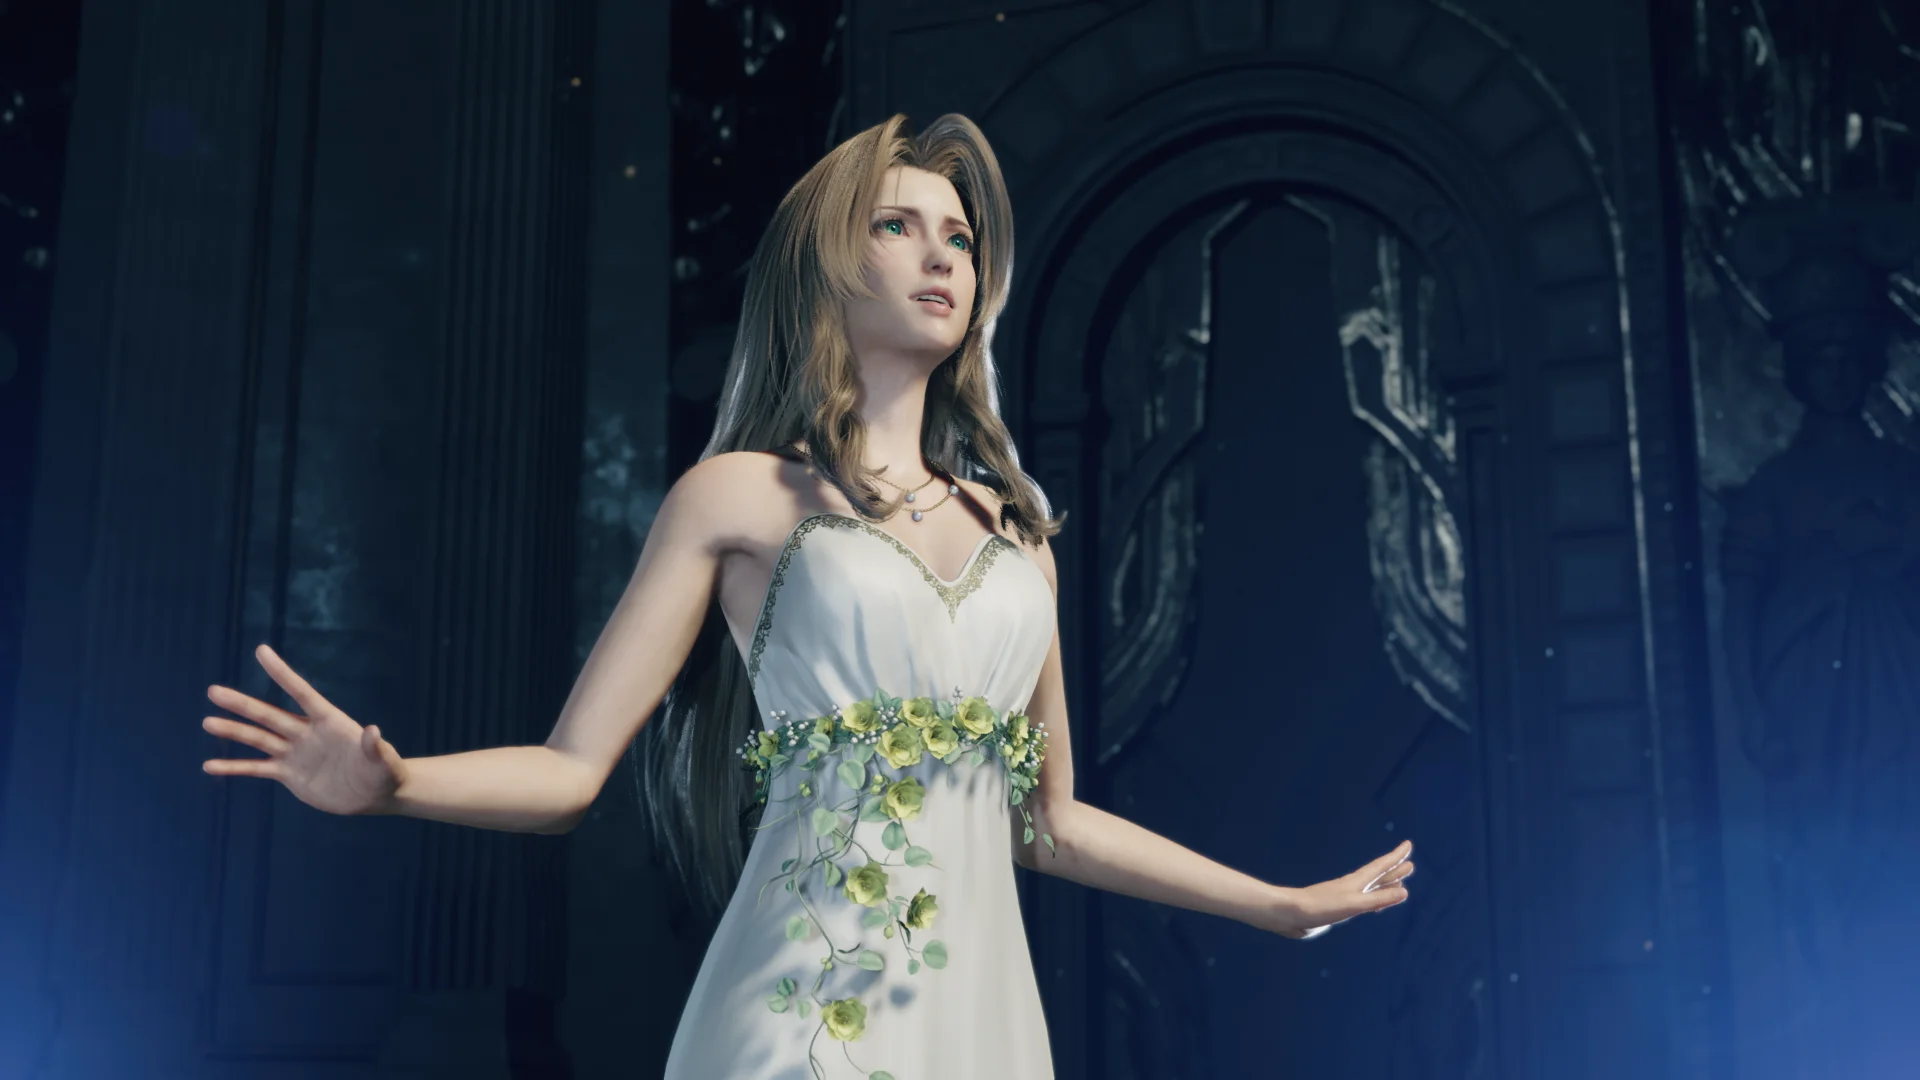 A screenshot of Aerith singing in Final Fantasy VII Rebirth. She wears a white dress, with her hands outstretched.